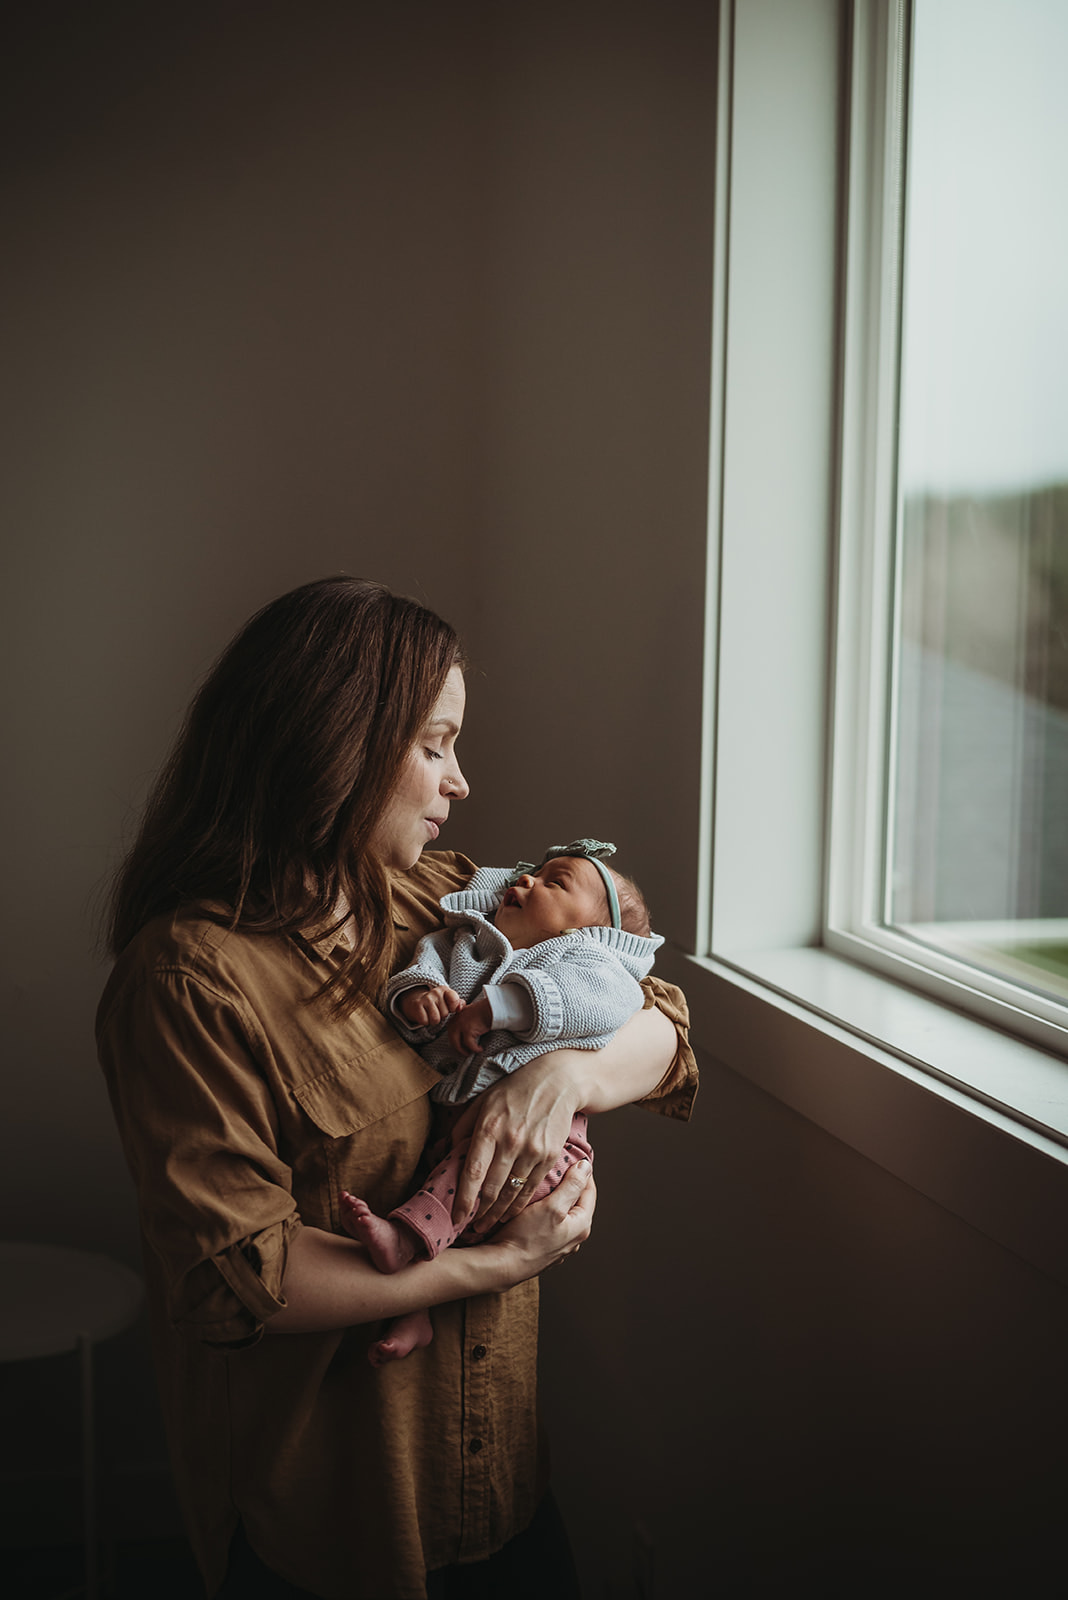 Beautiful home newborn photography session captured in the Comox Valley, BC, Canada